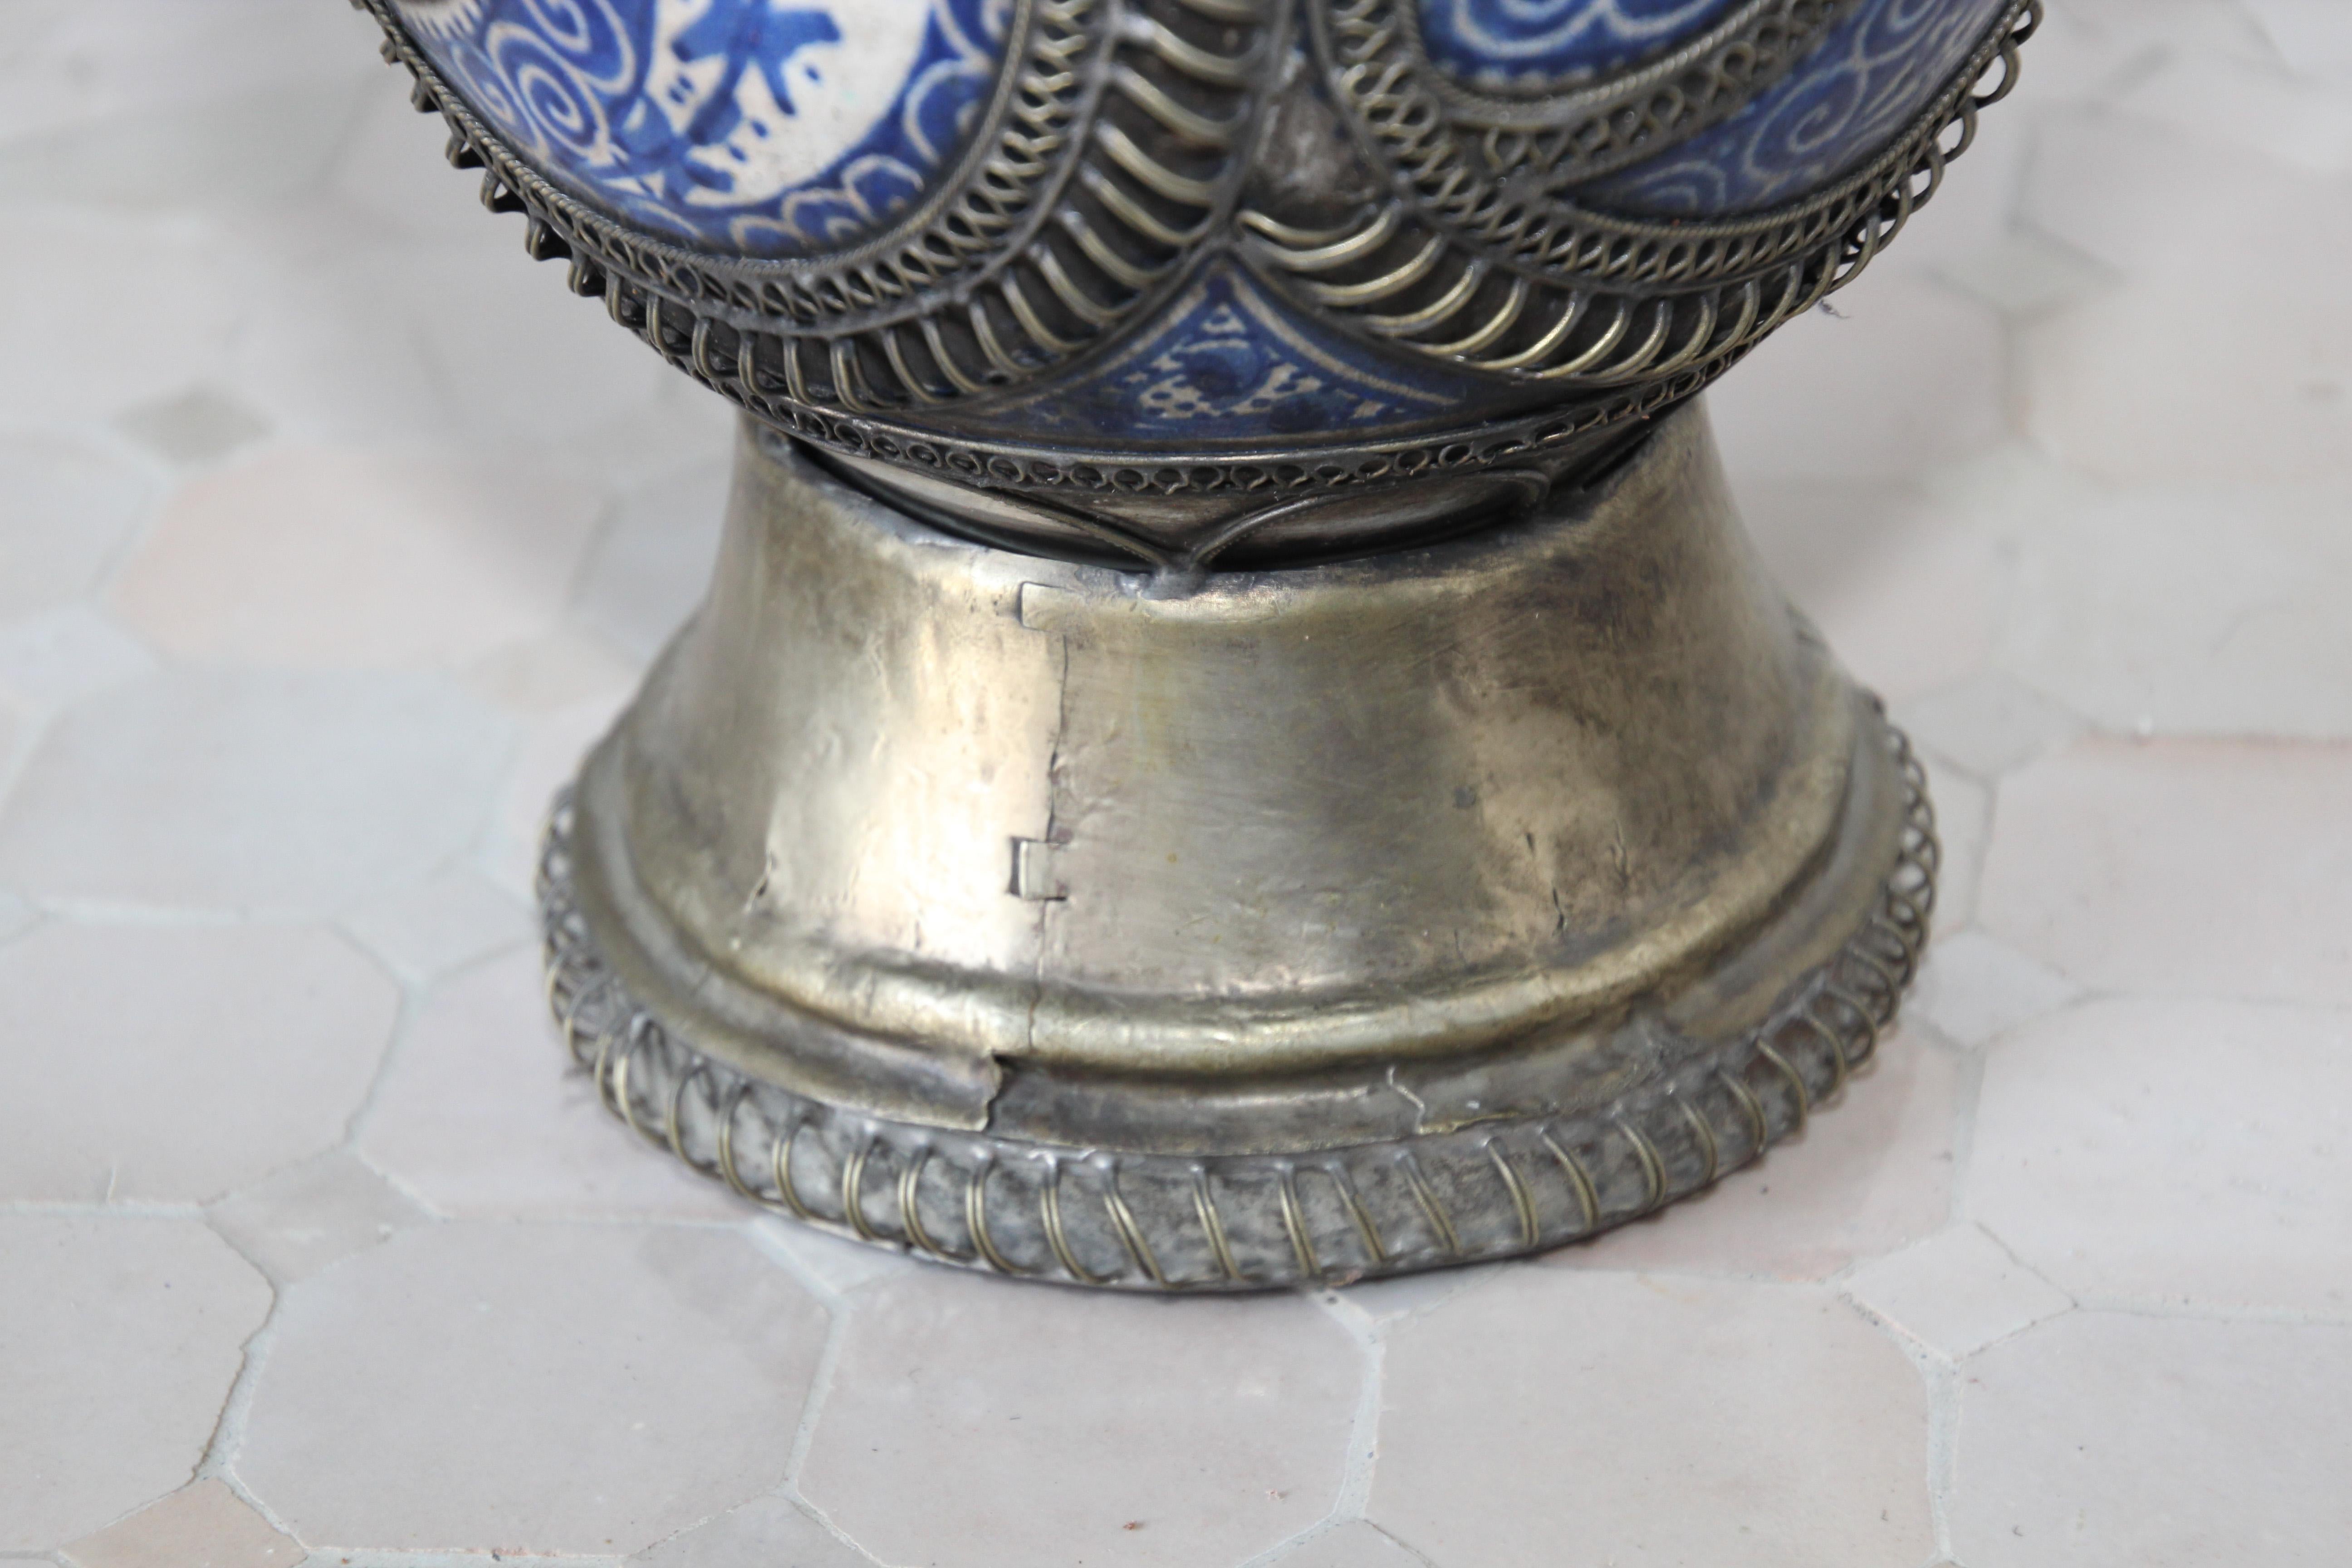 Moorish Moroccan Blue and White Ceramic Vase from Fez with Silver Filigree For Sale 6